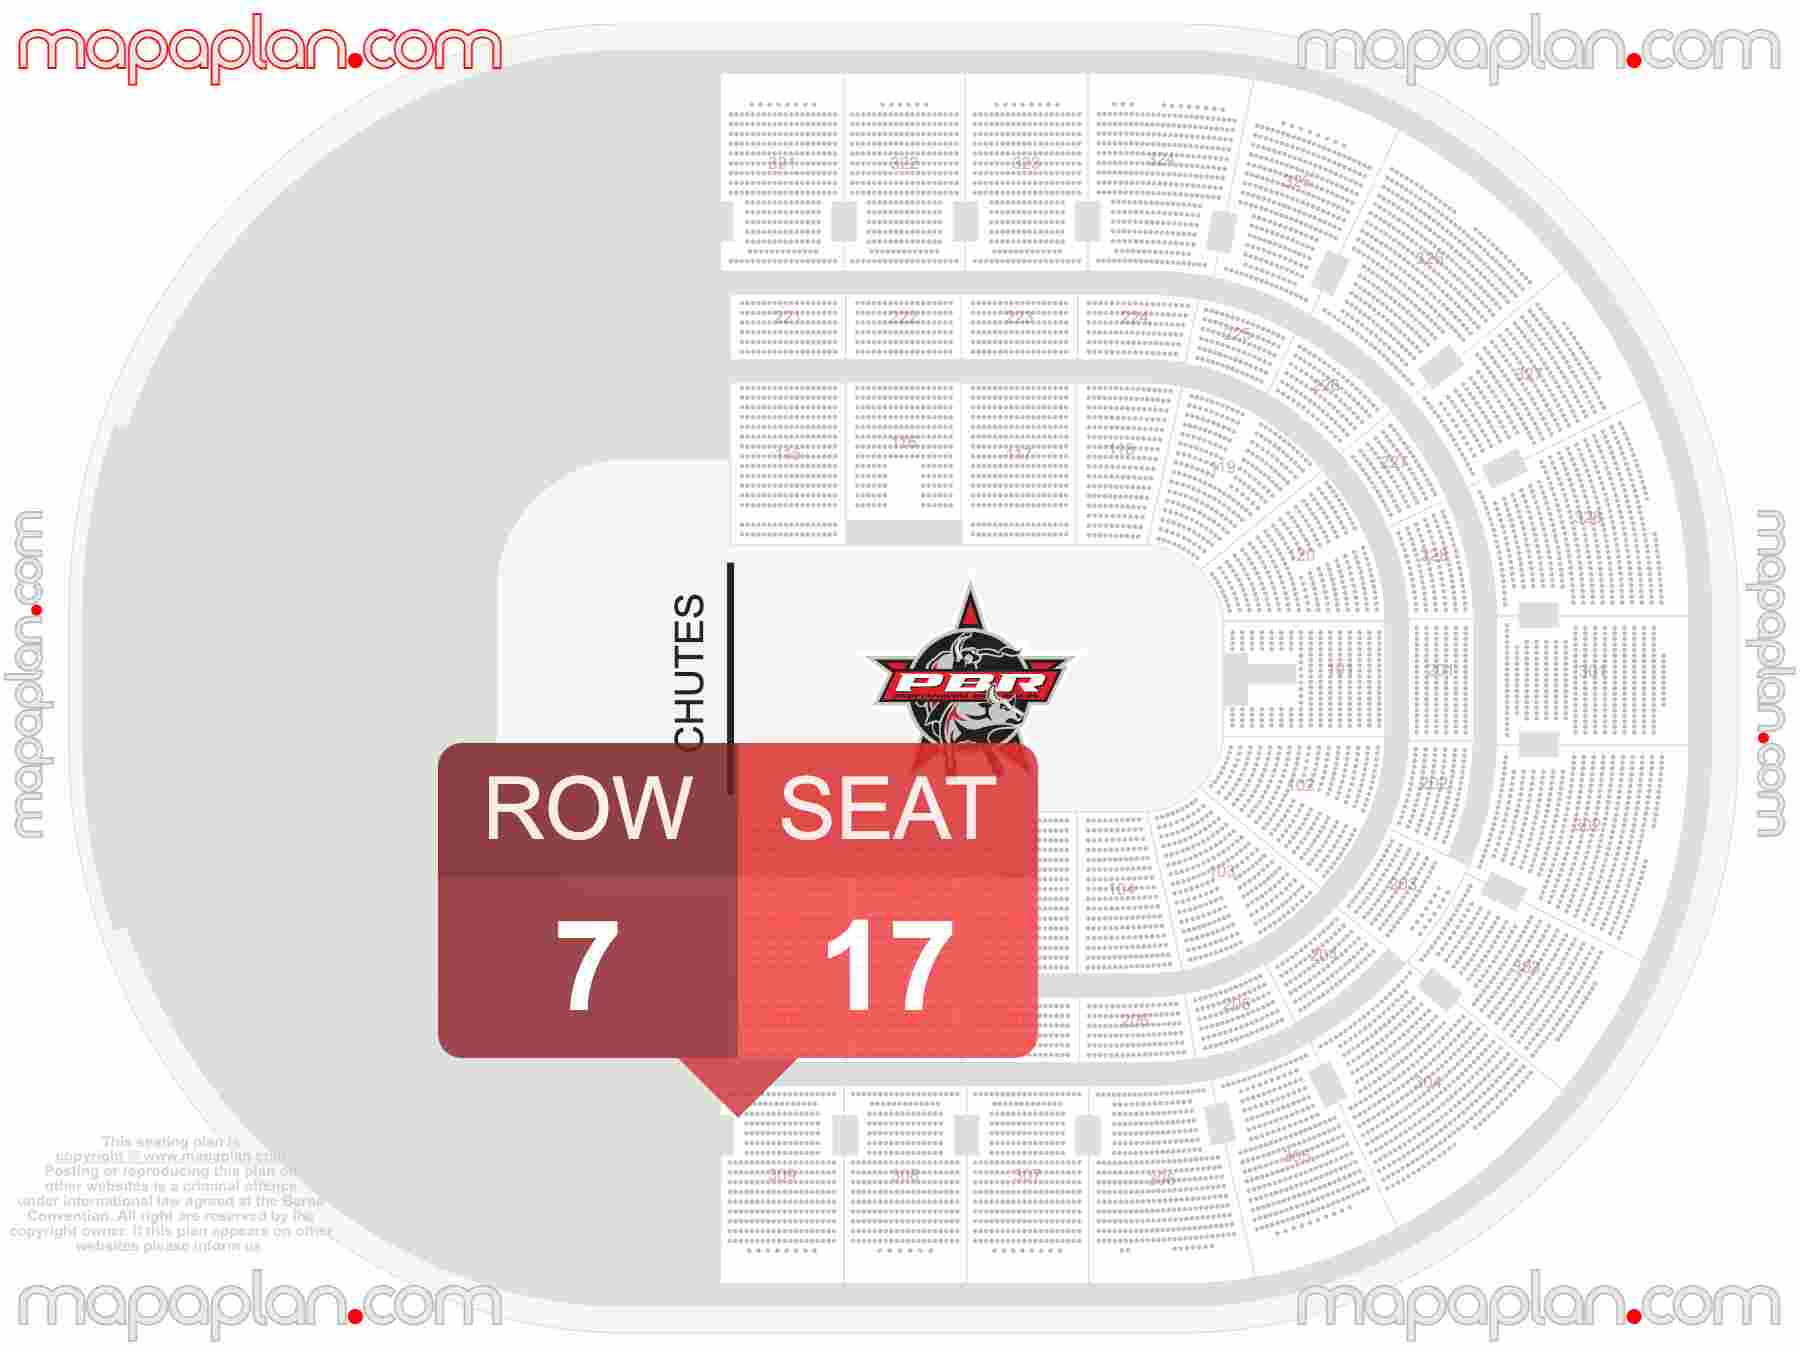 Ottawa Canadian Tire Centre seating map PBR Professional Bull Riders seating chart - Interactive map to find best seat and row numbers